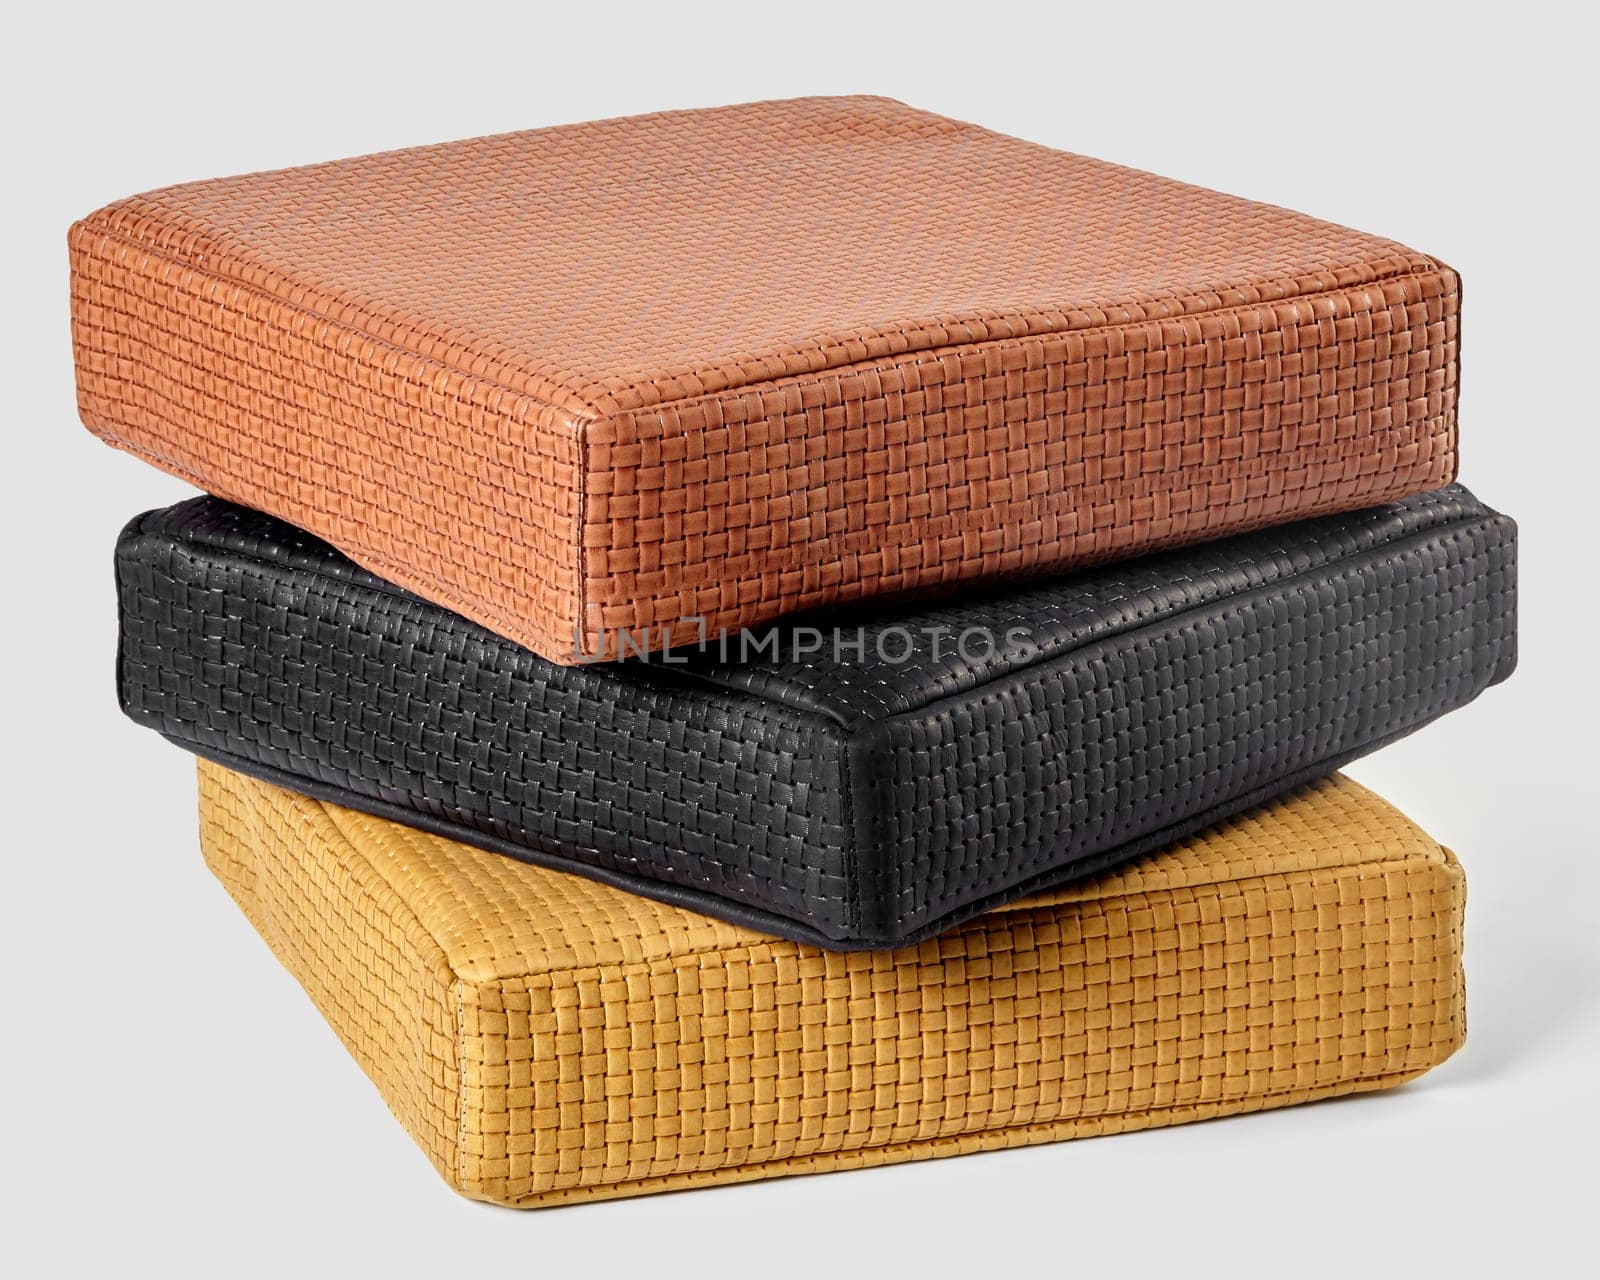 Stack of colorful artisanal leather cushions with woven texture by nazarovsergey